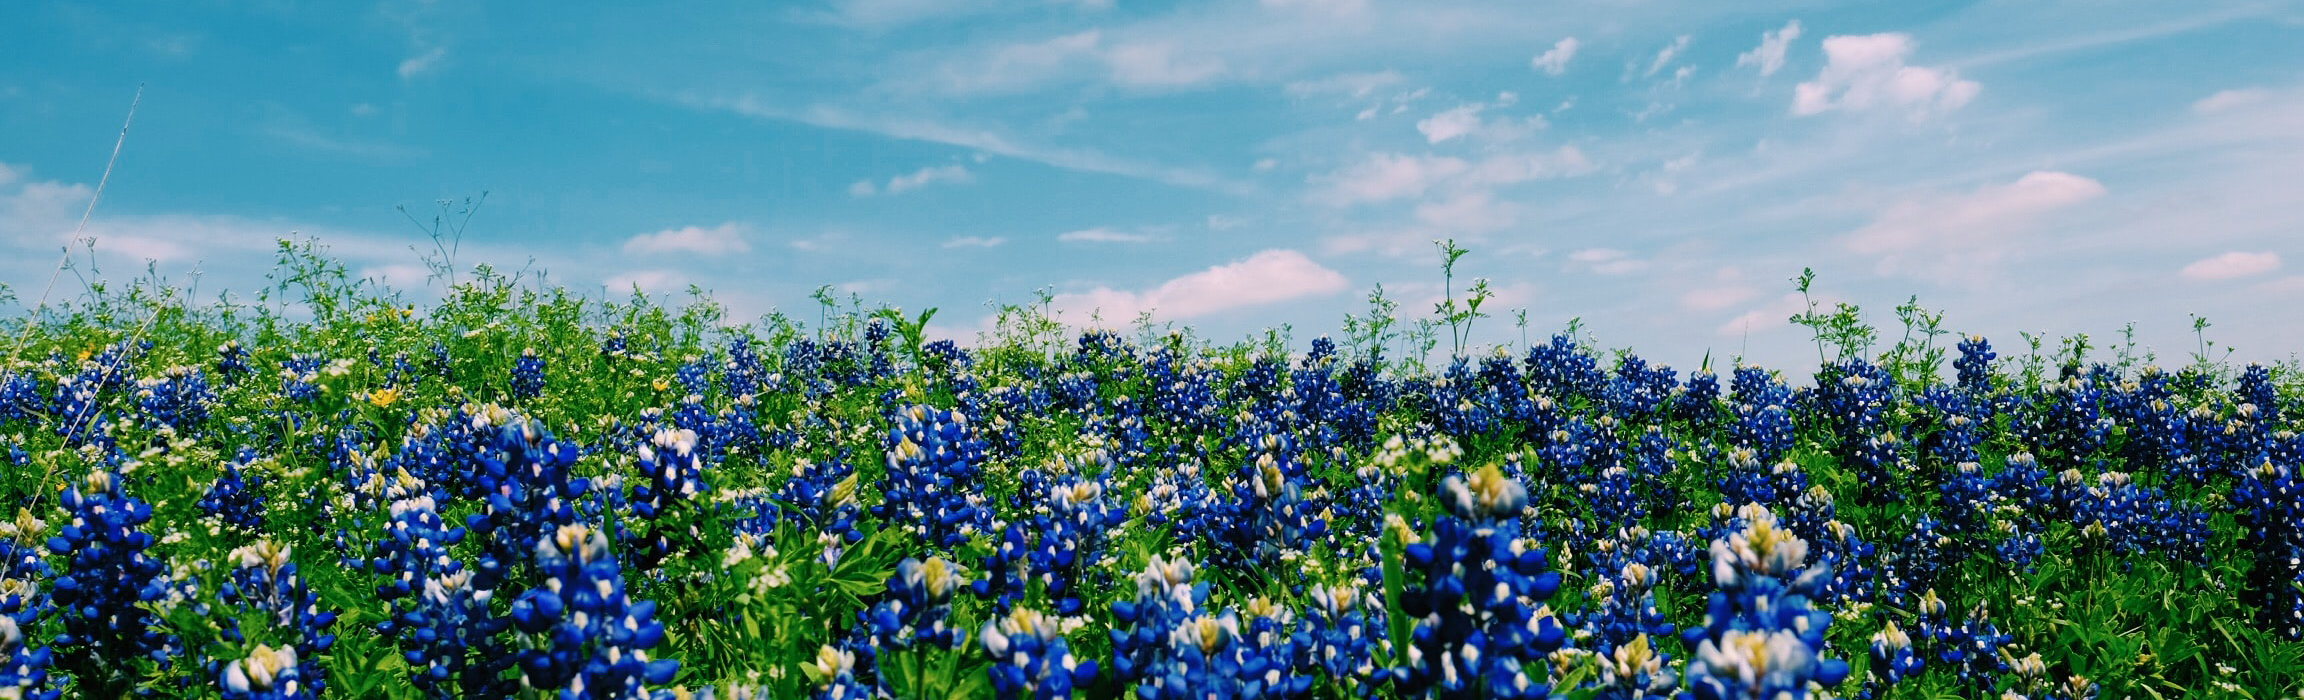 Image of a field of bluebonnets with a blue sky and wispy clouds.